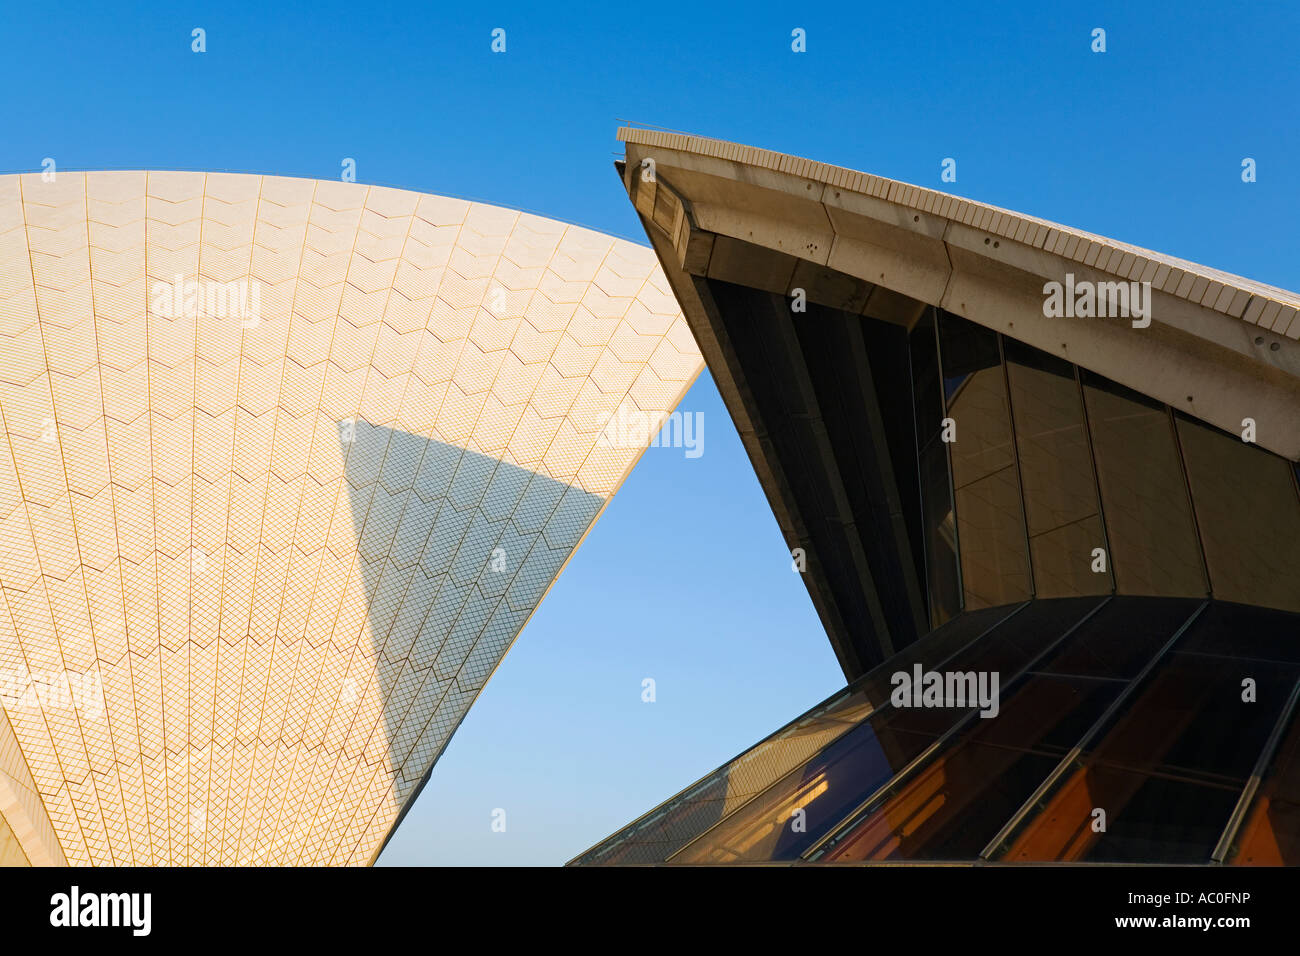 The Iconic Arched Roofs Of The Sydney Opera House Completed In